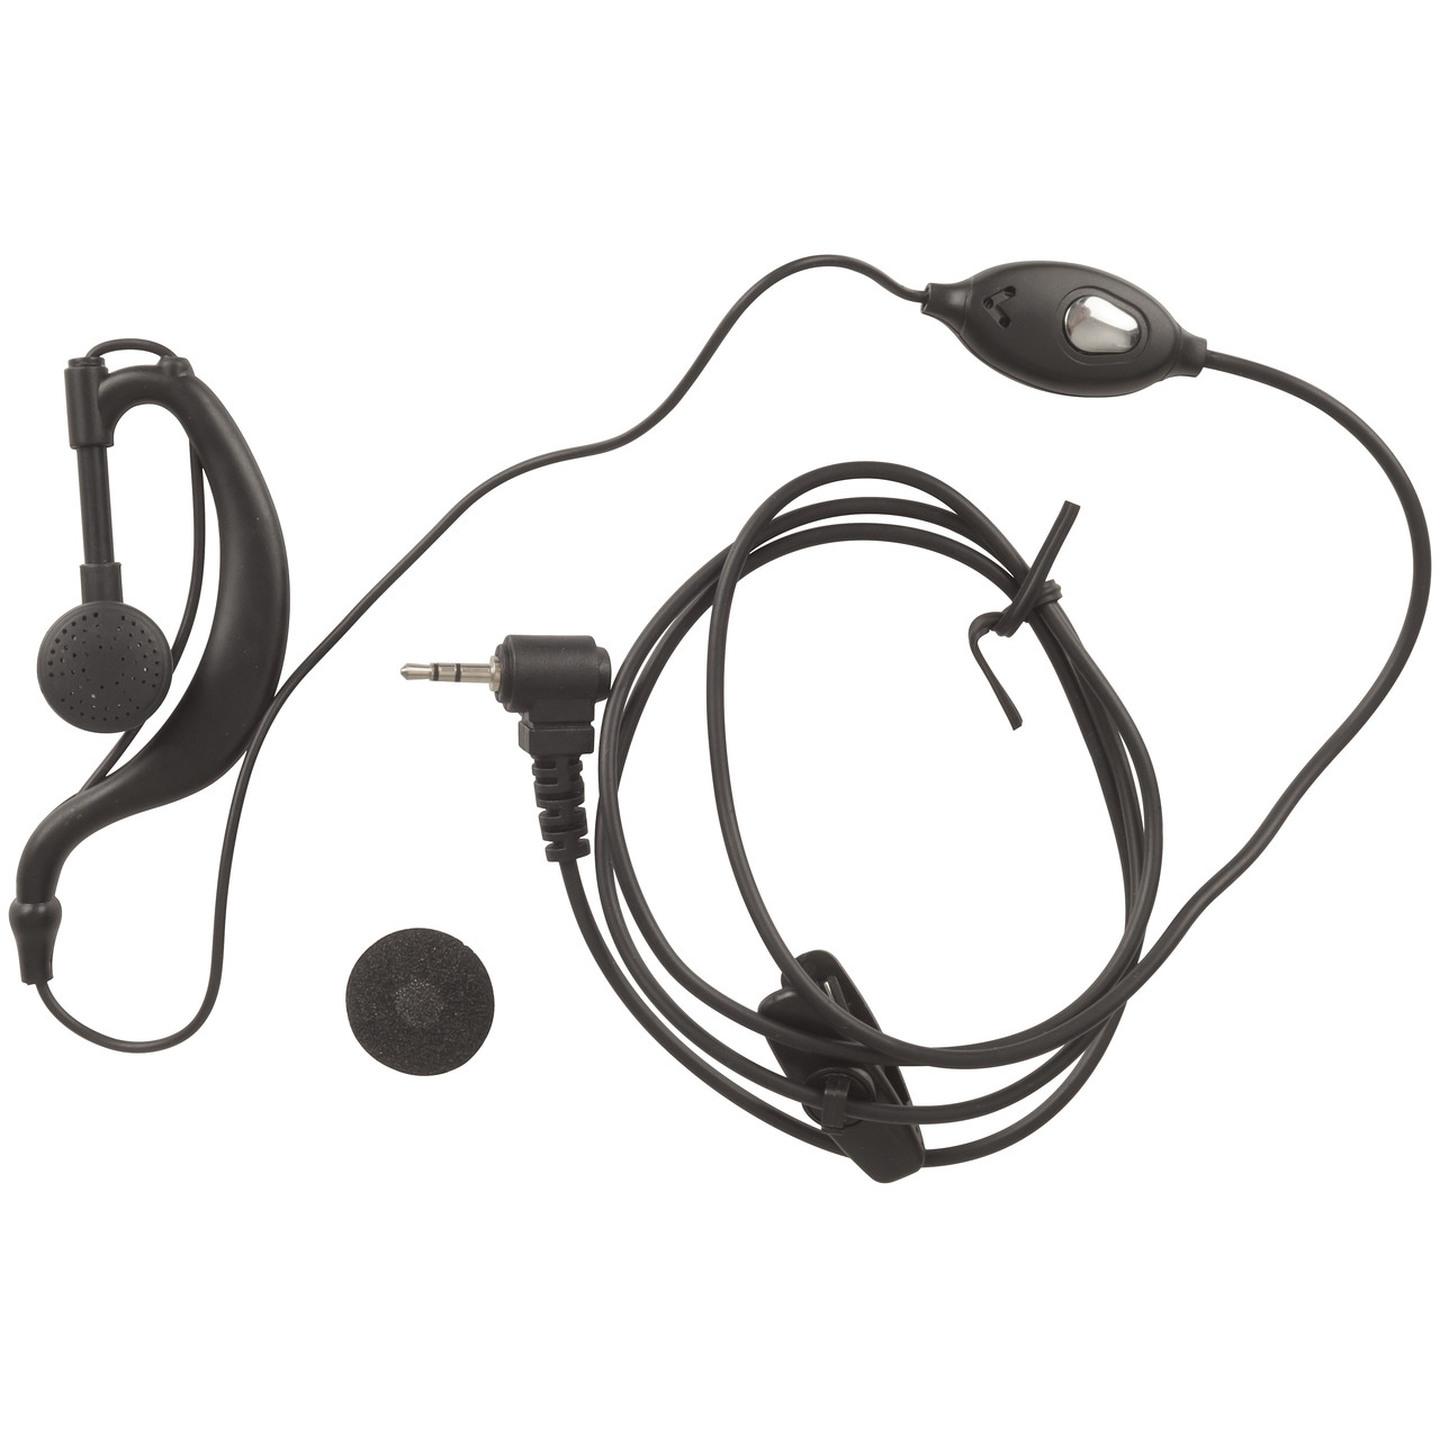 Headset to Suit NEXTECH 0.5W UHF Transceivers